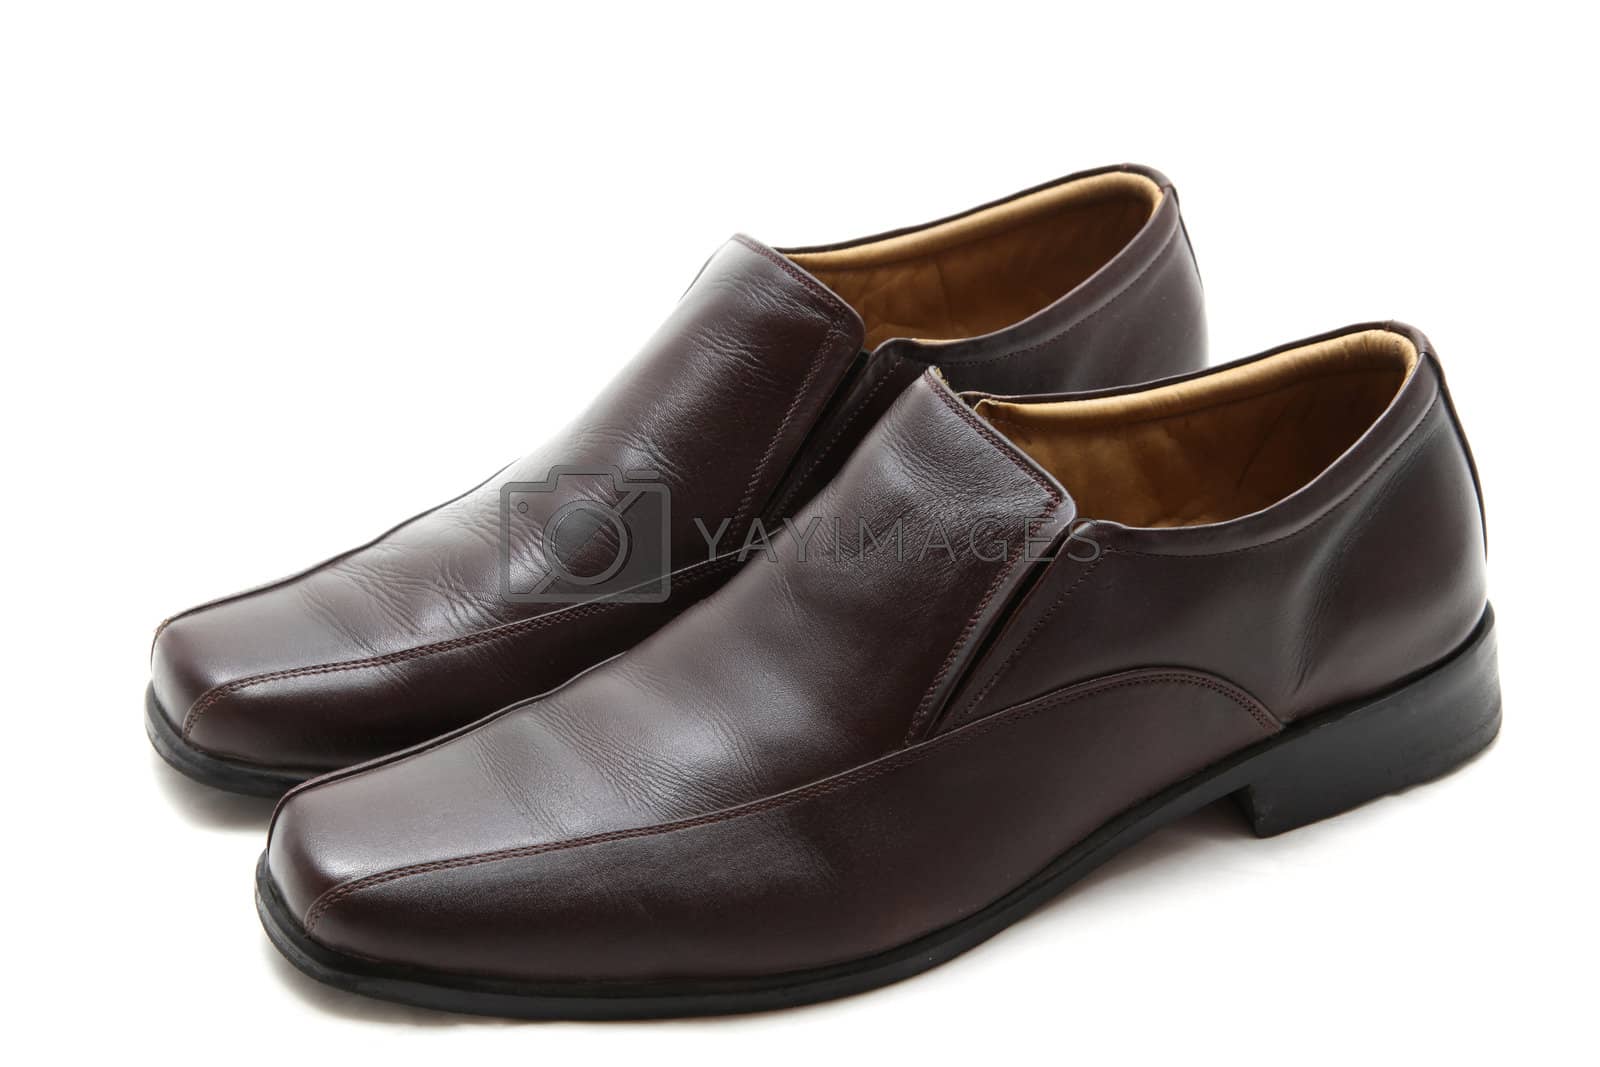 Royalty free image of brown leather shoes by vichie81